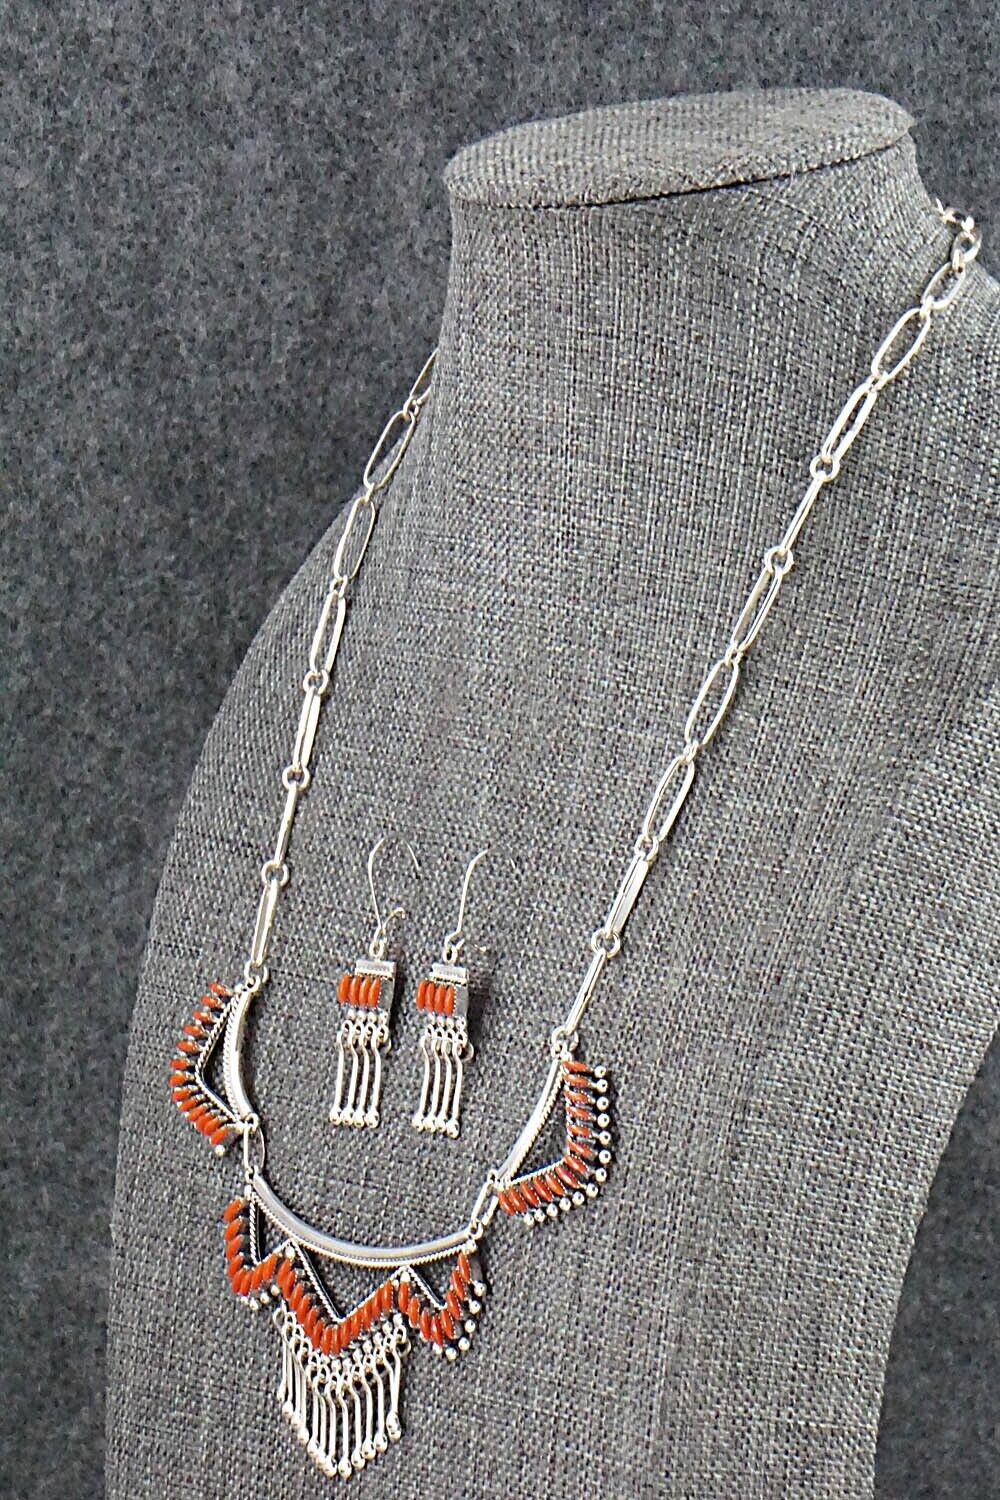 Coral & Sterling Silver Necklace and Earrings Set - Stewart Nakatewa